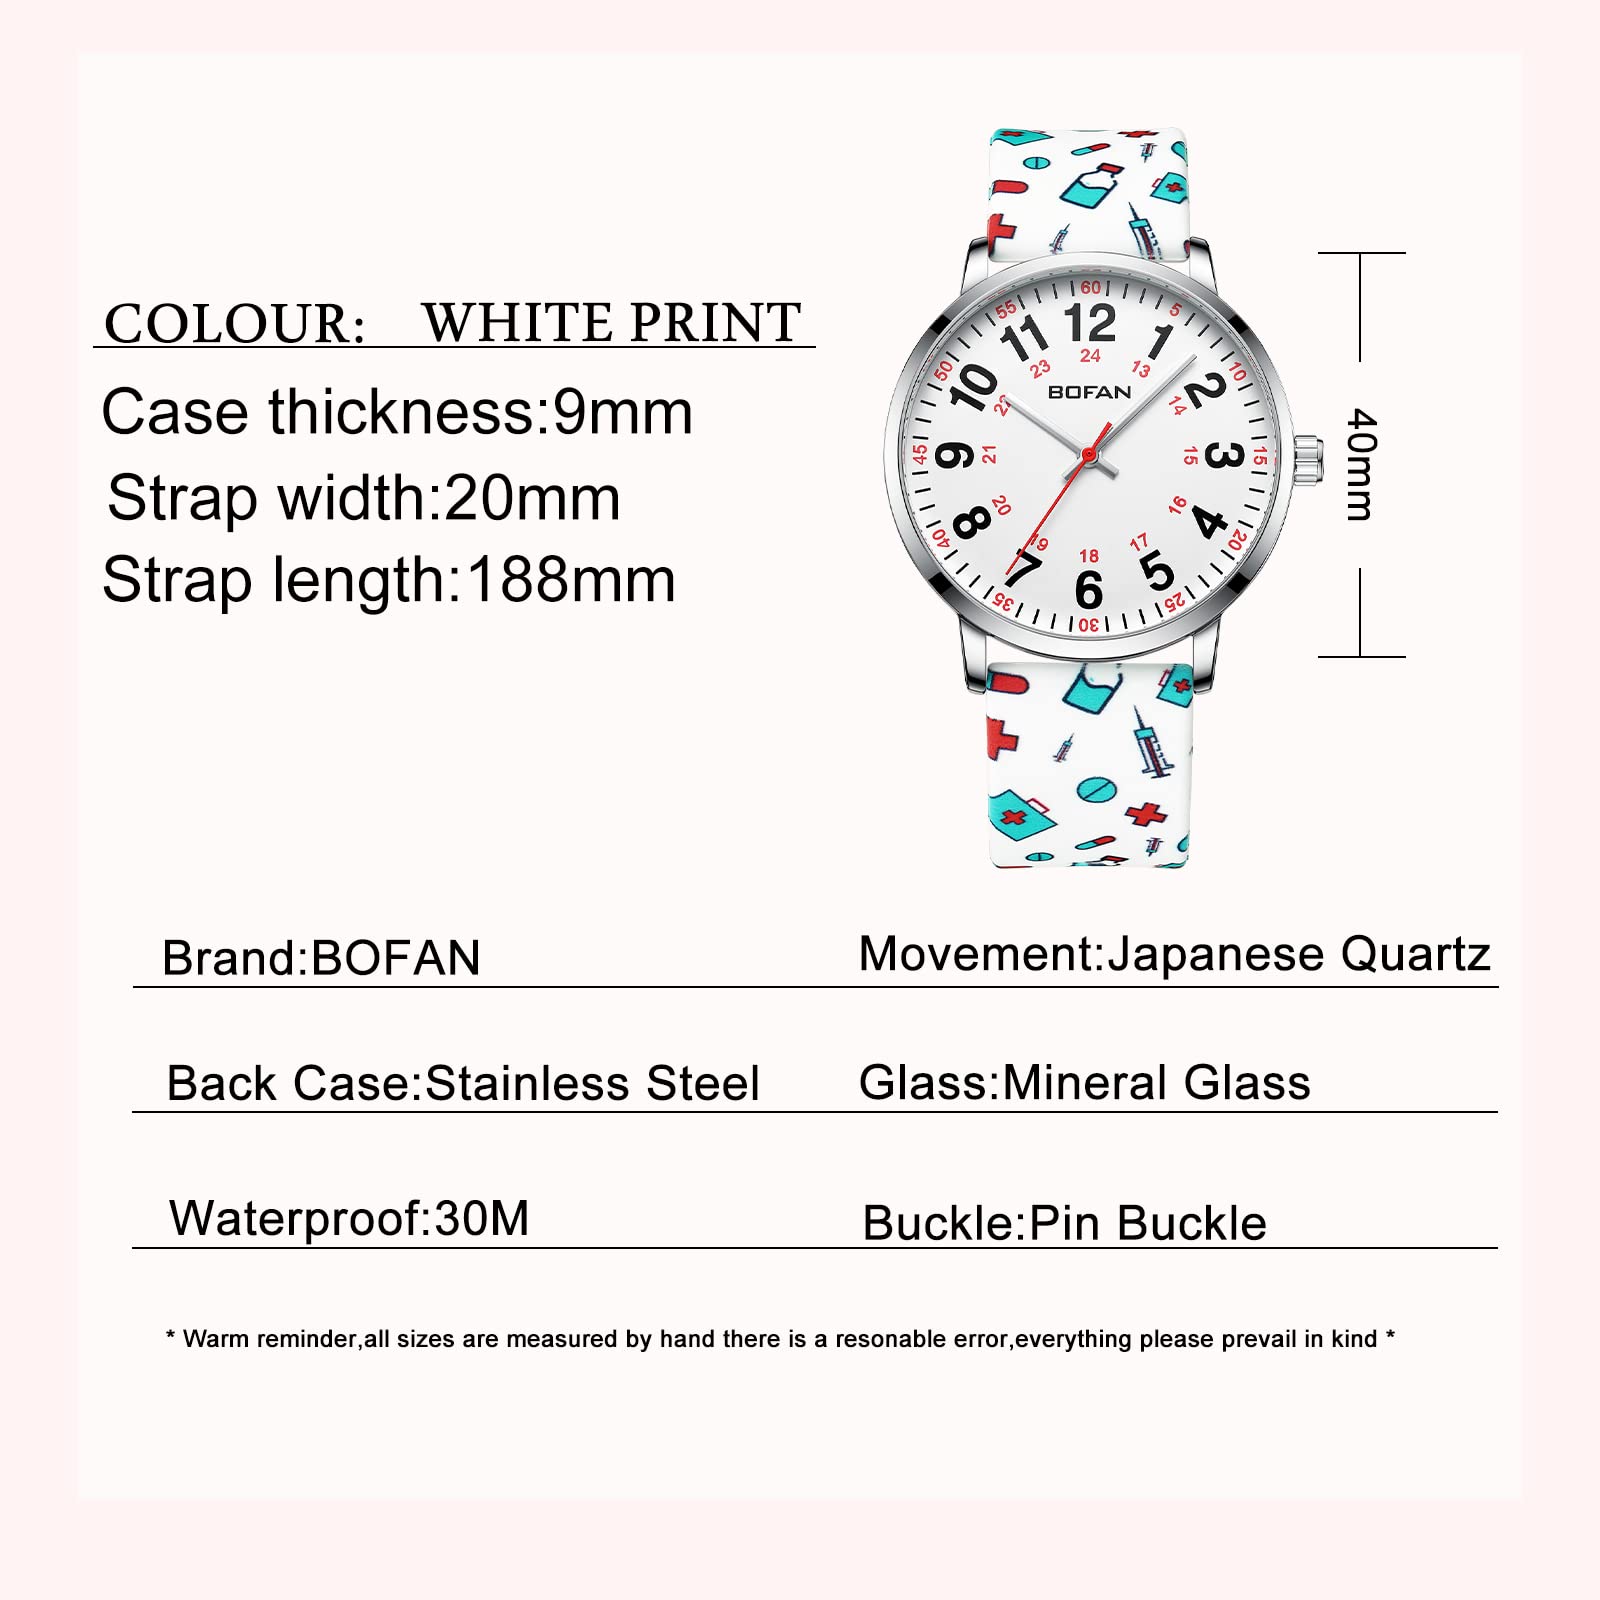 BOFAN Nurse Watch for Nurse,Medical Professionals,Students,Doctors with Various Medical Scrub Colors,Easy to Read Dial,Second Hand and 24 Hour,Soft Comfort Print Silicone Band,Water Resistant.